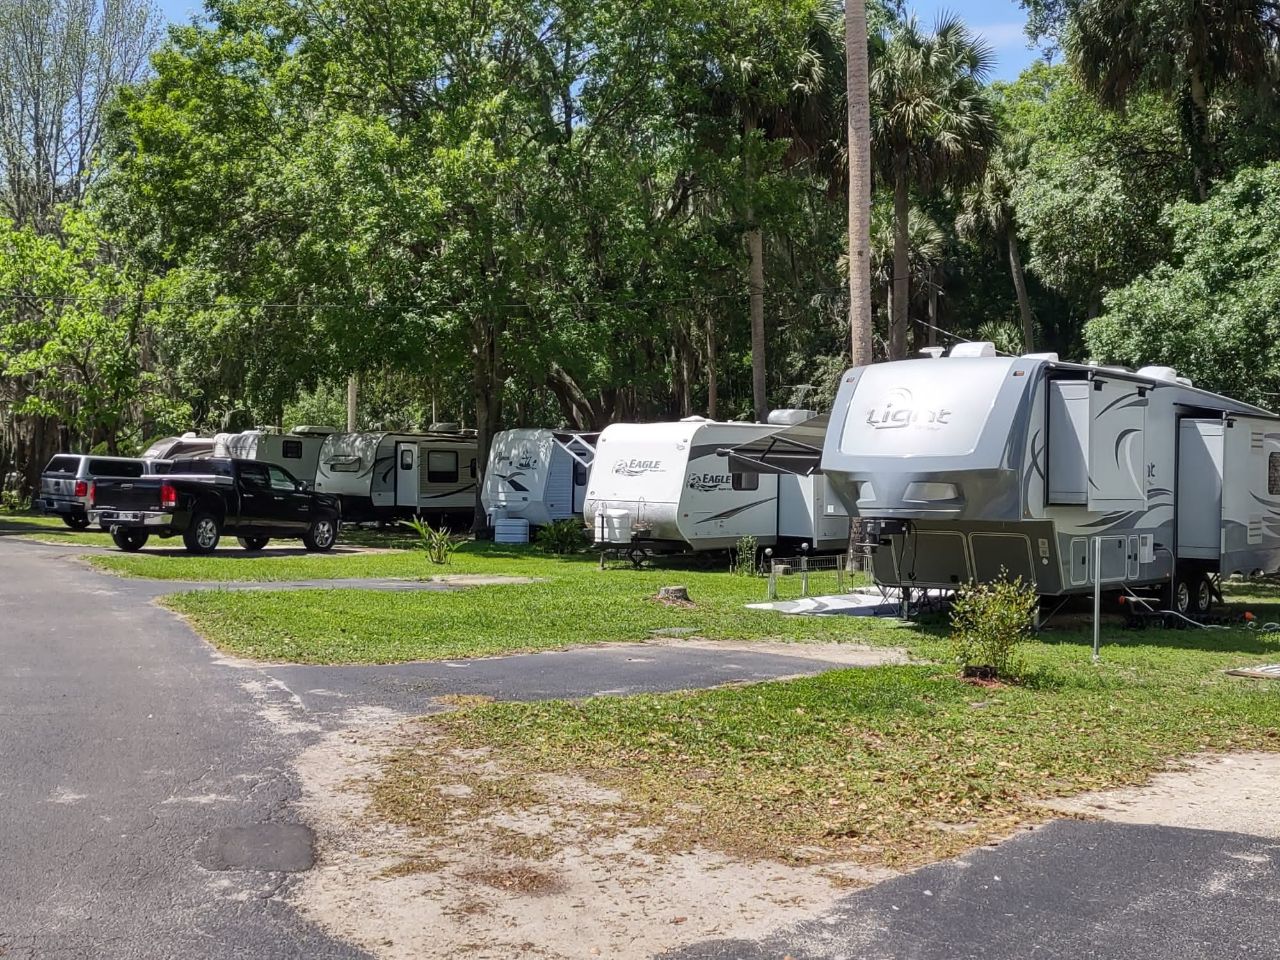 Full Hook Up RV Sites For Rent At Citra Royal Palm RV Park